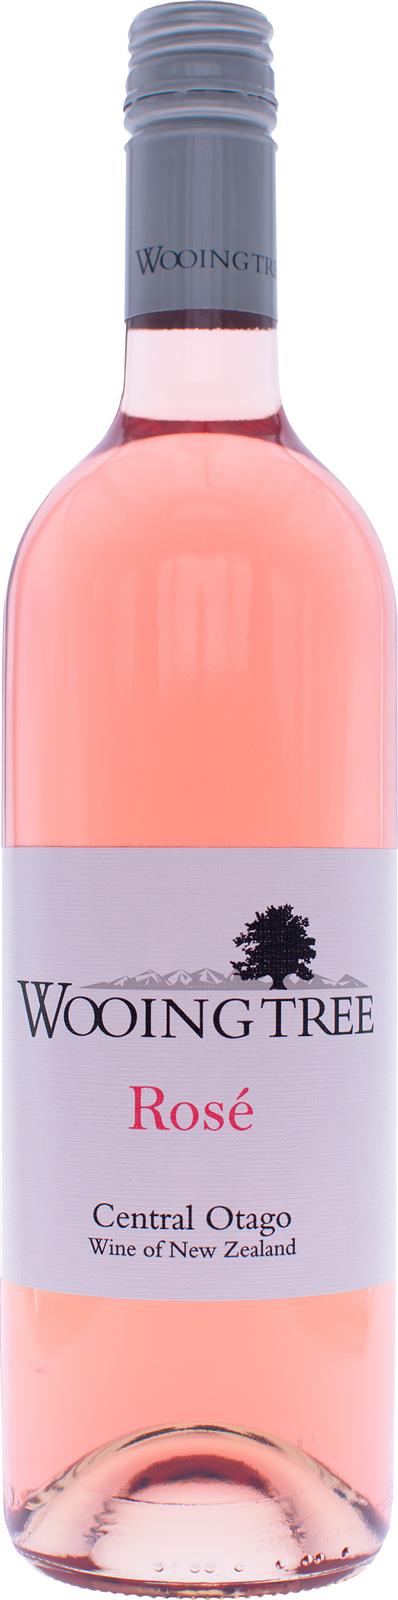 Wooing Tree Central Otago Rosé 2019